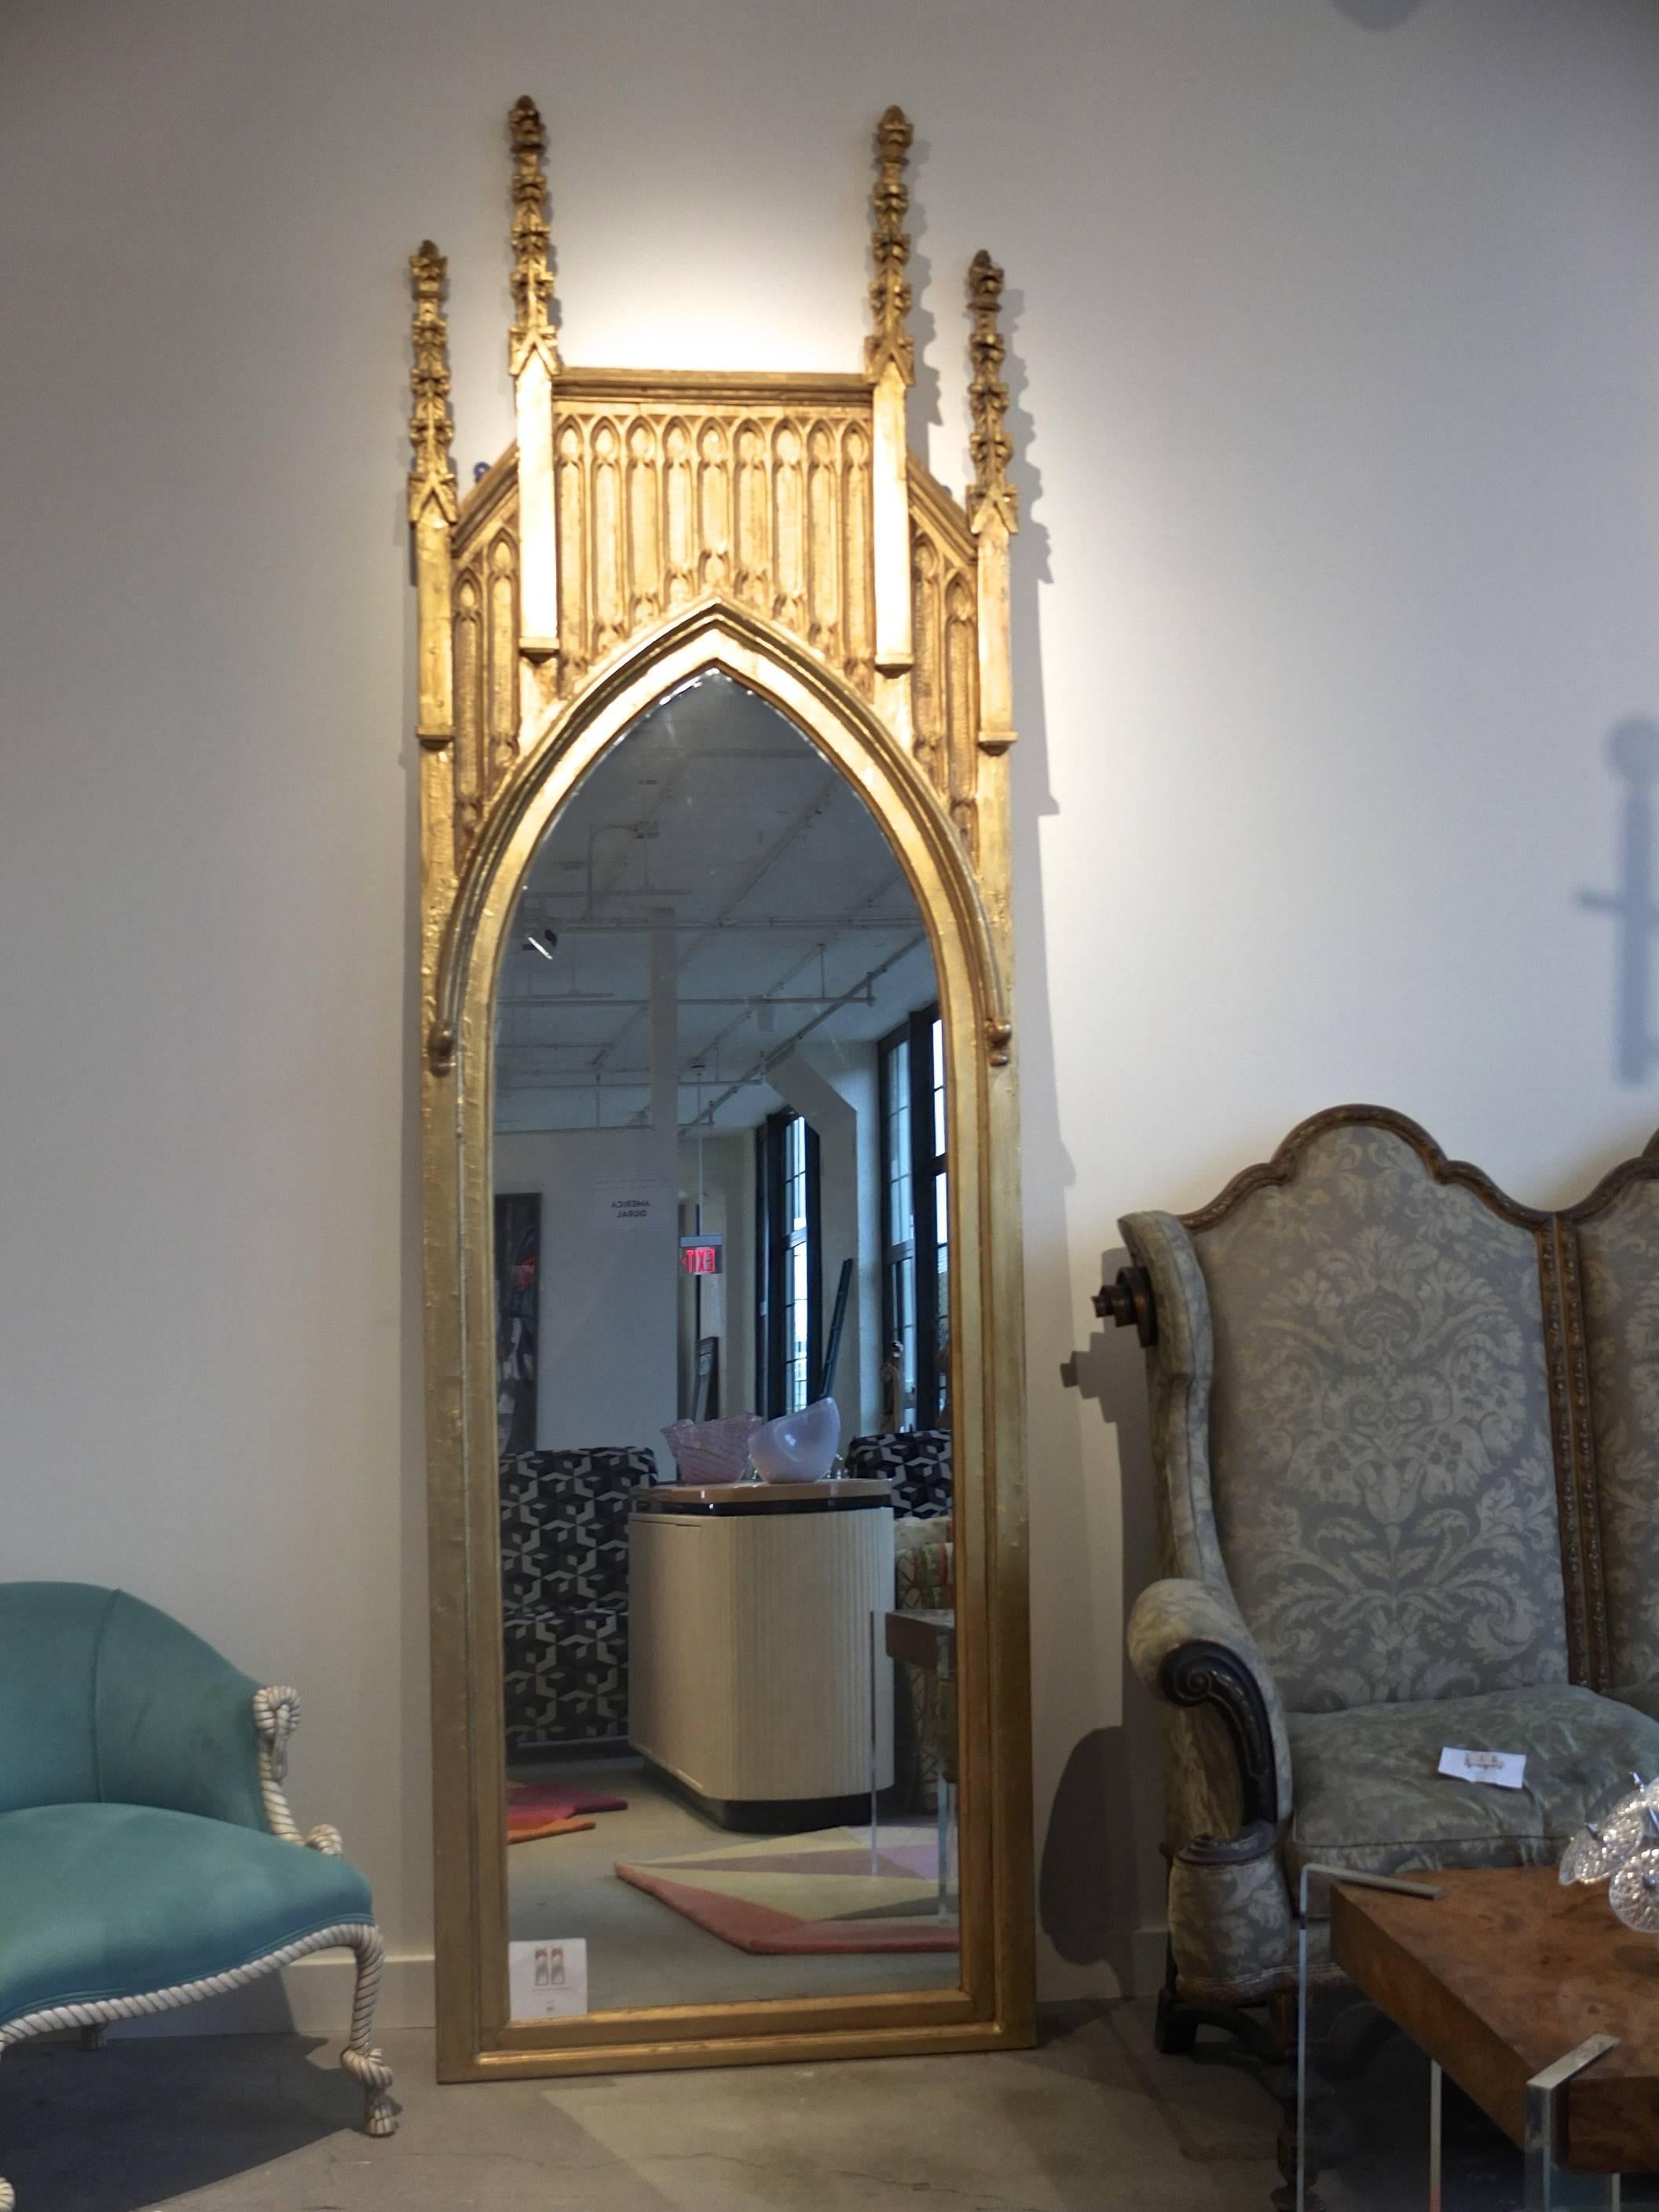 Gesso Pair of English Gothic Architectural Giltwood Mirrors ~9 feet tall For Sale